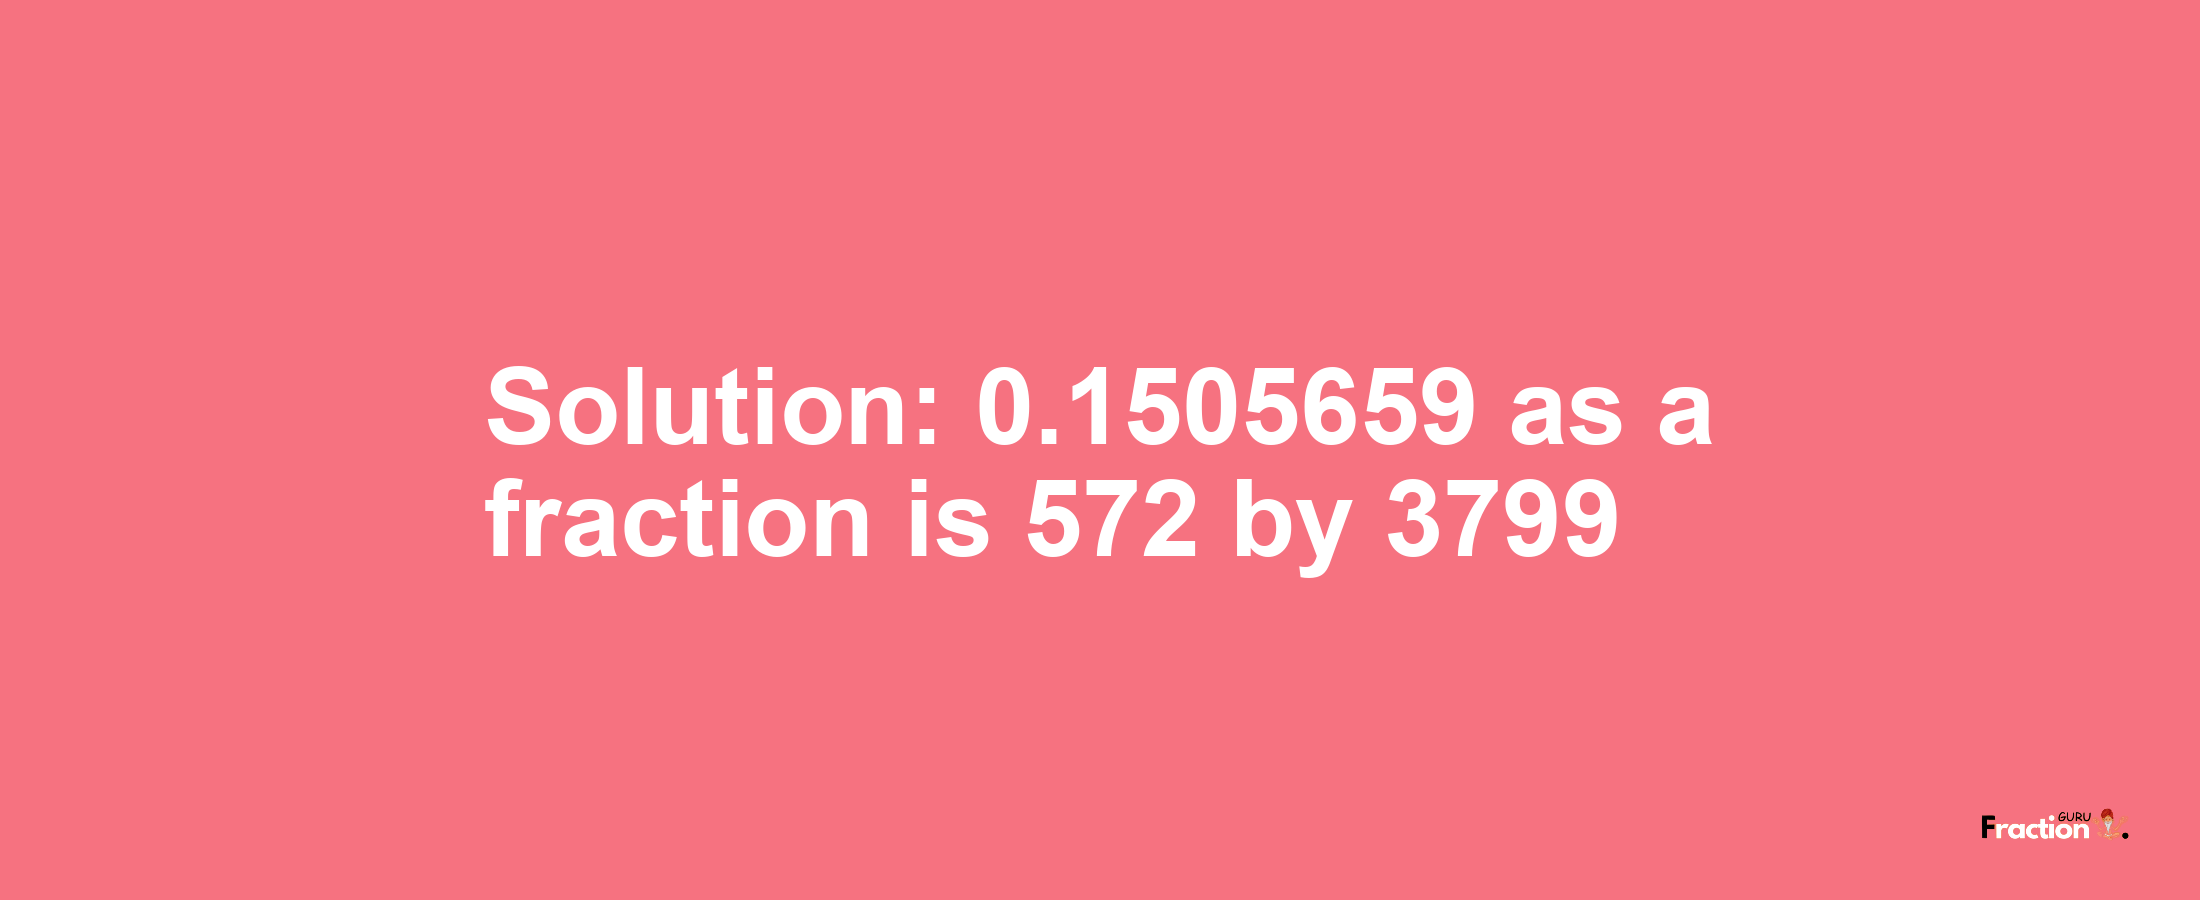 Solution:0.1505659 as a fraction is 572/3799